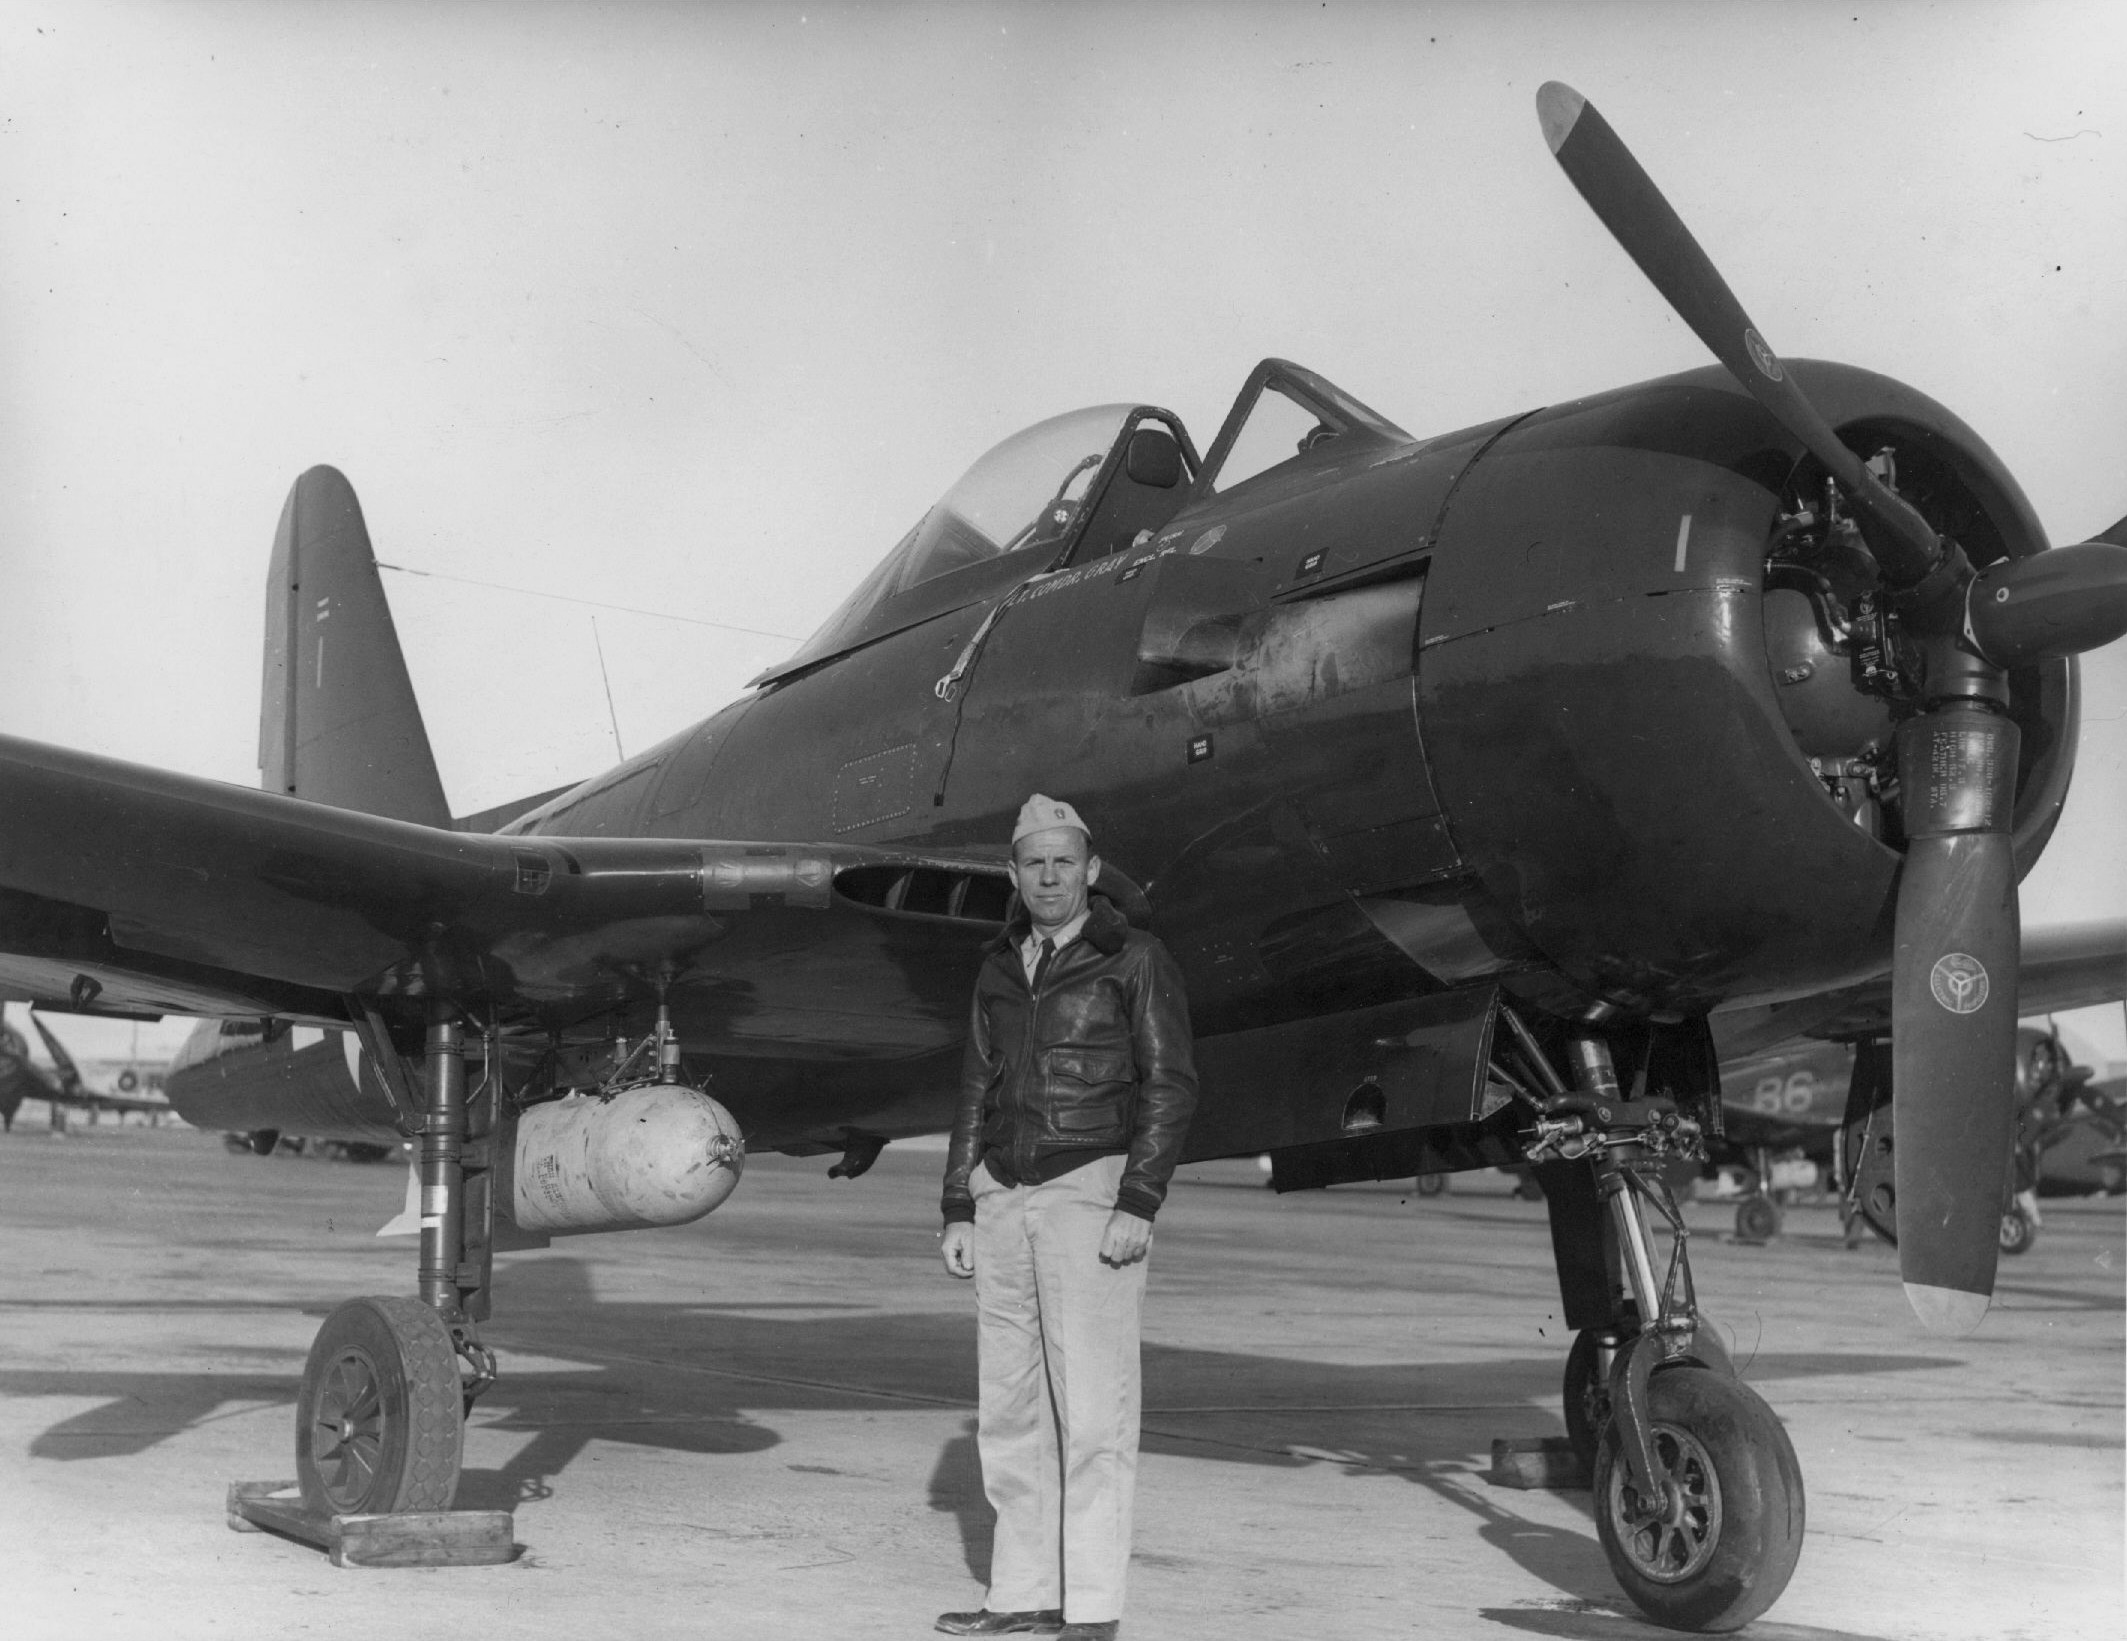 US Navy squadron VF-66 commanding officer Lieutenant Commander John Gray posing with a FR-1 Fireball fighter, Naval Air Station North Island, California, United States, 1945